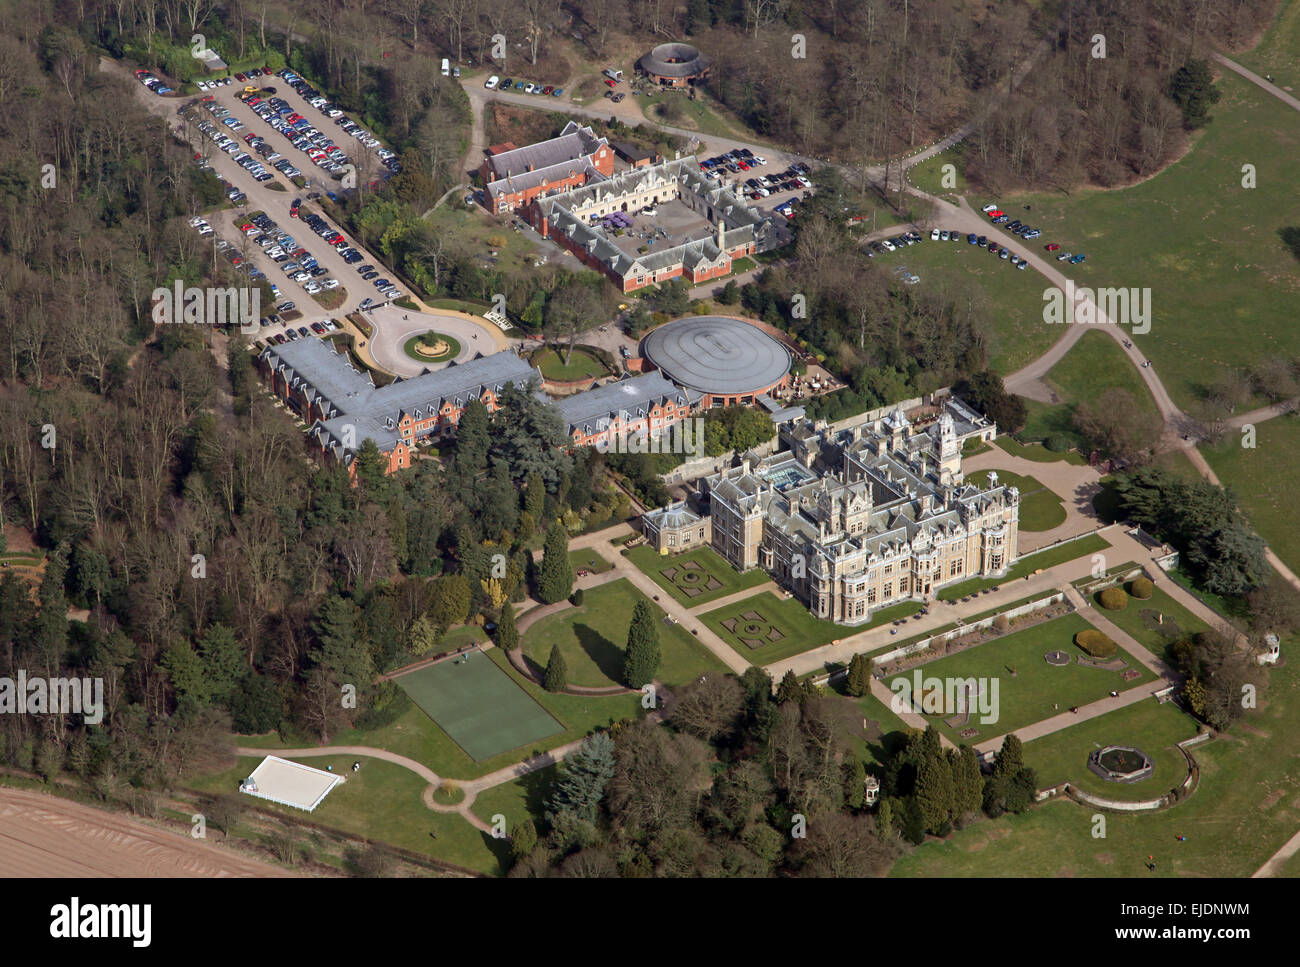 aerial view of Thoresby Hall Hotel in Thoresby Park, Ollerton, Nottinghamshire, UK Stock Photo